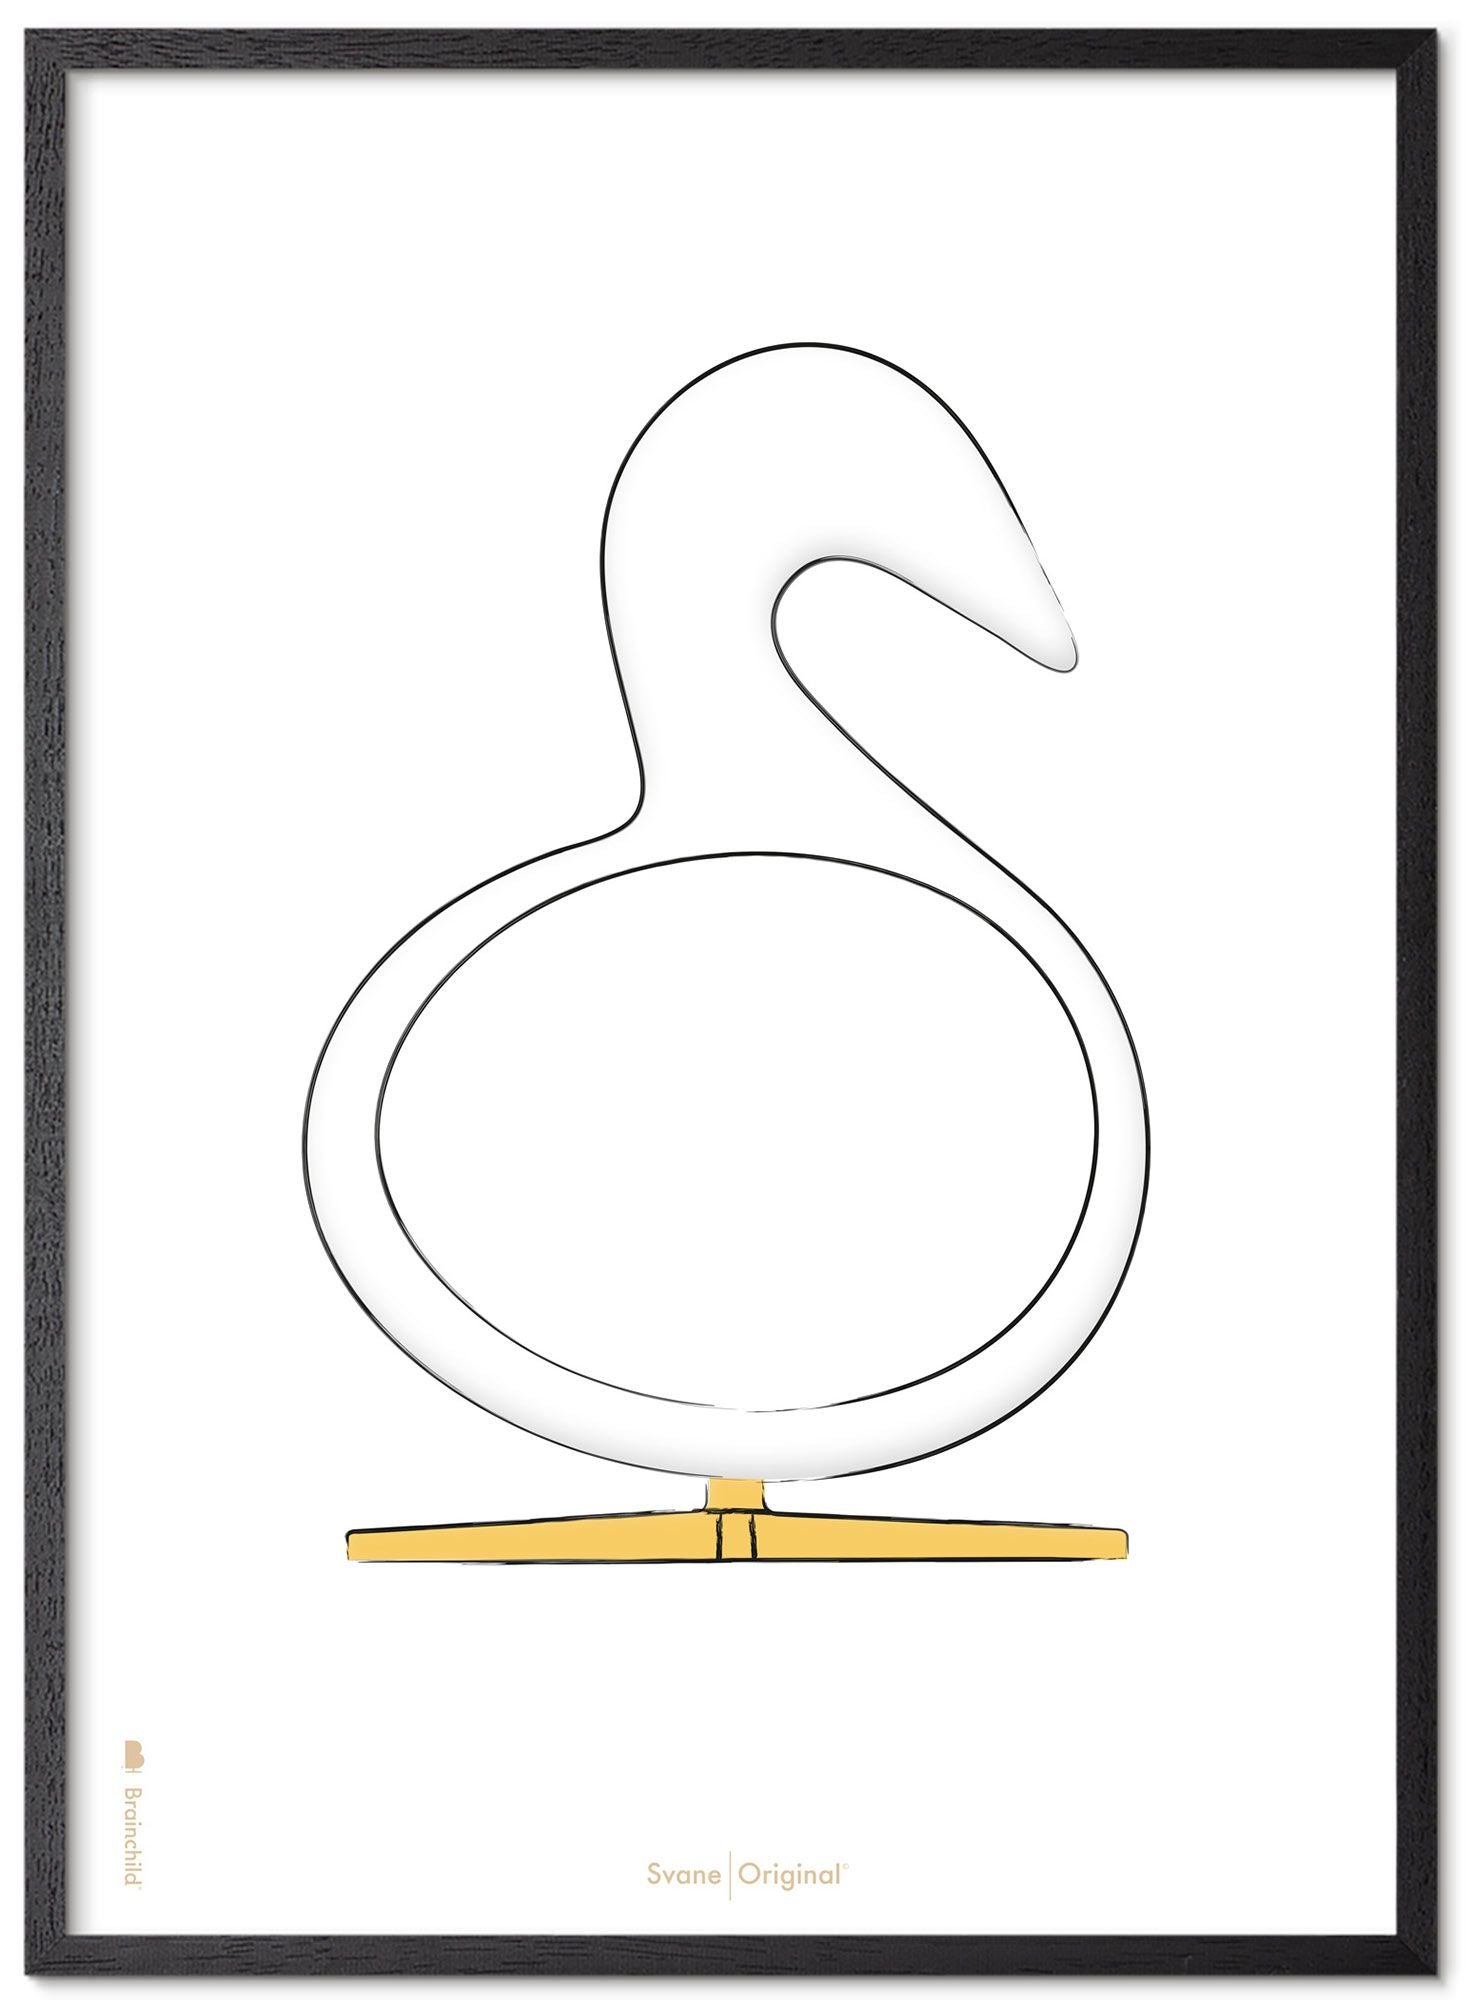 Brainchild Swan Design Sketch Poster Frame Made Of Black Lacquered Wood 70x100 Cm, White Background